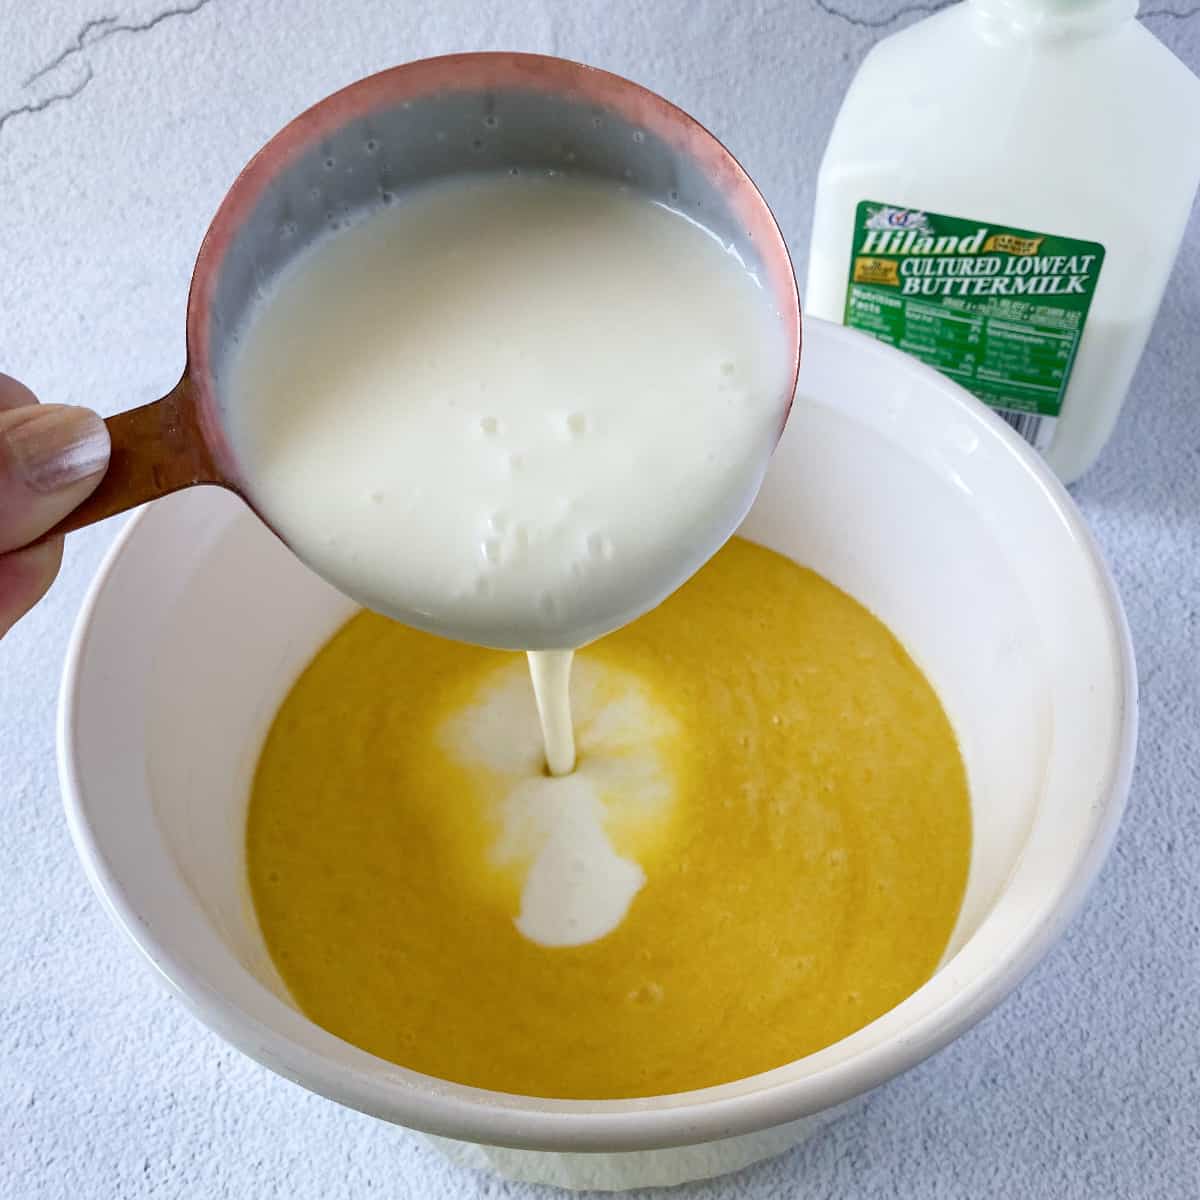 pouring buttermilk into a bowl with melted butter, eggs, sugar, and olive oil with a carton of Hiland Dairy buttermilk in the background